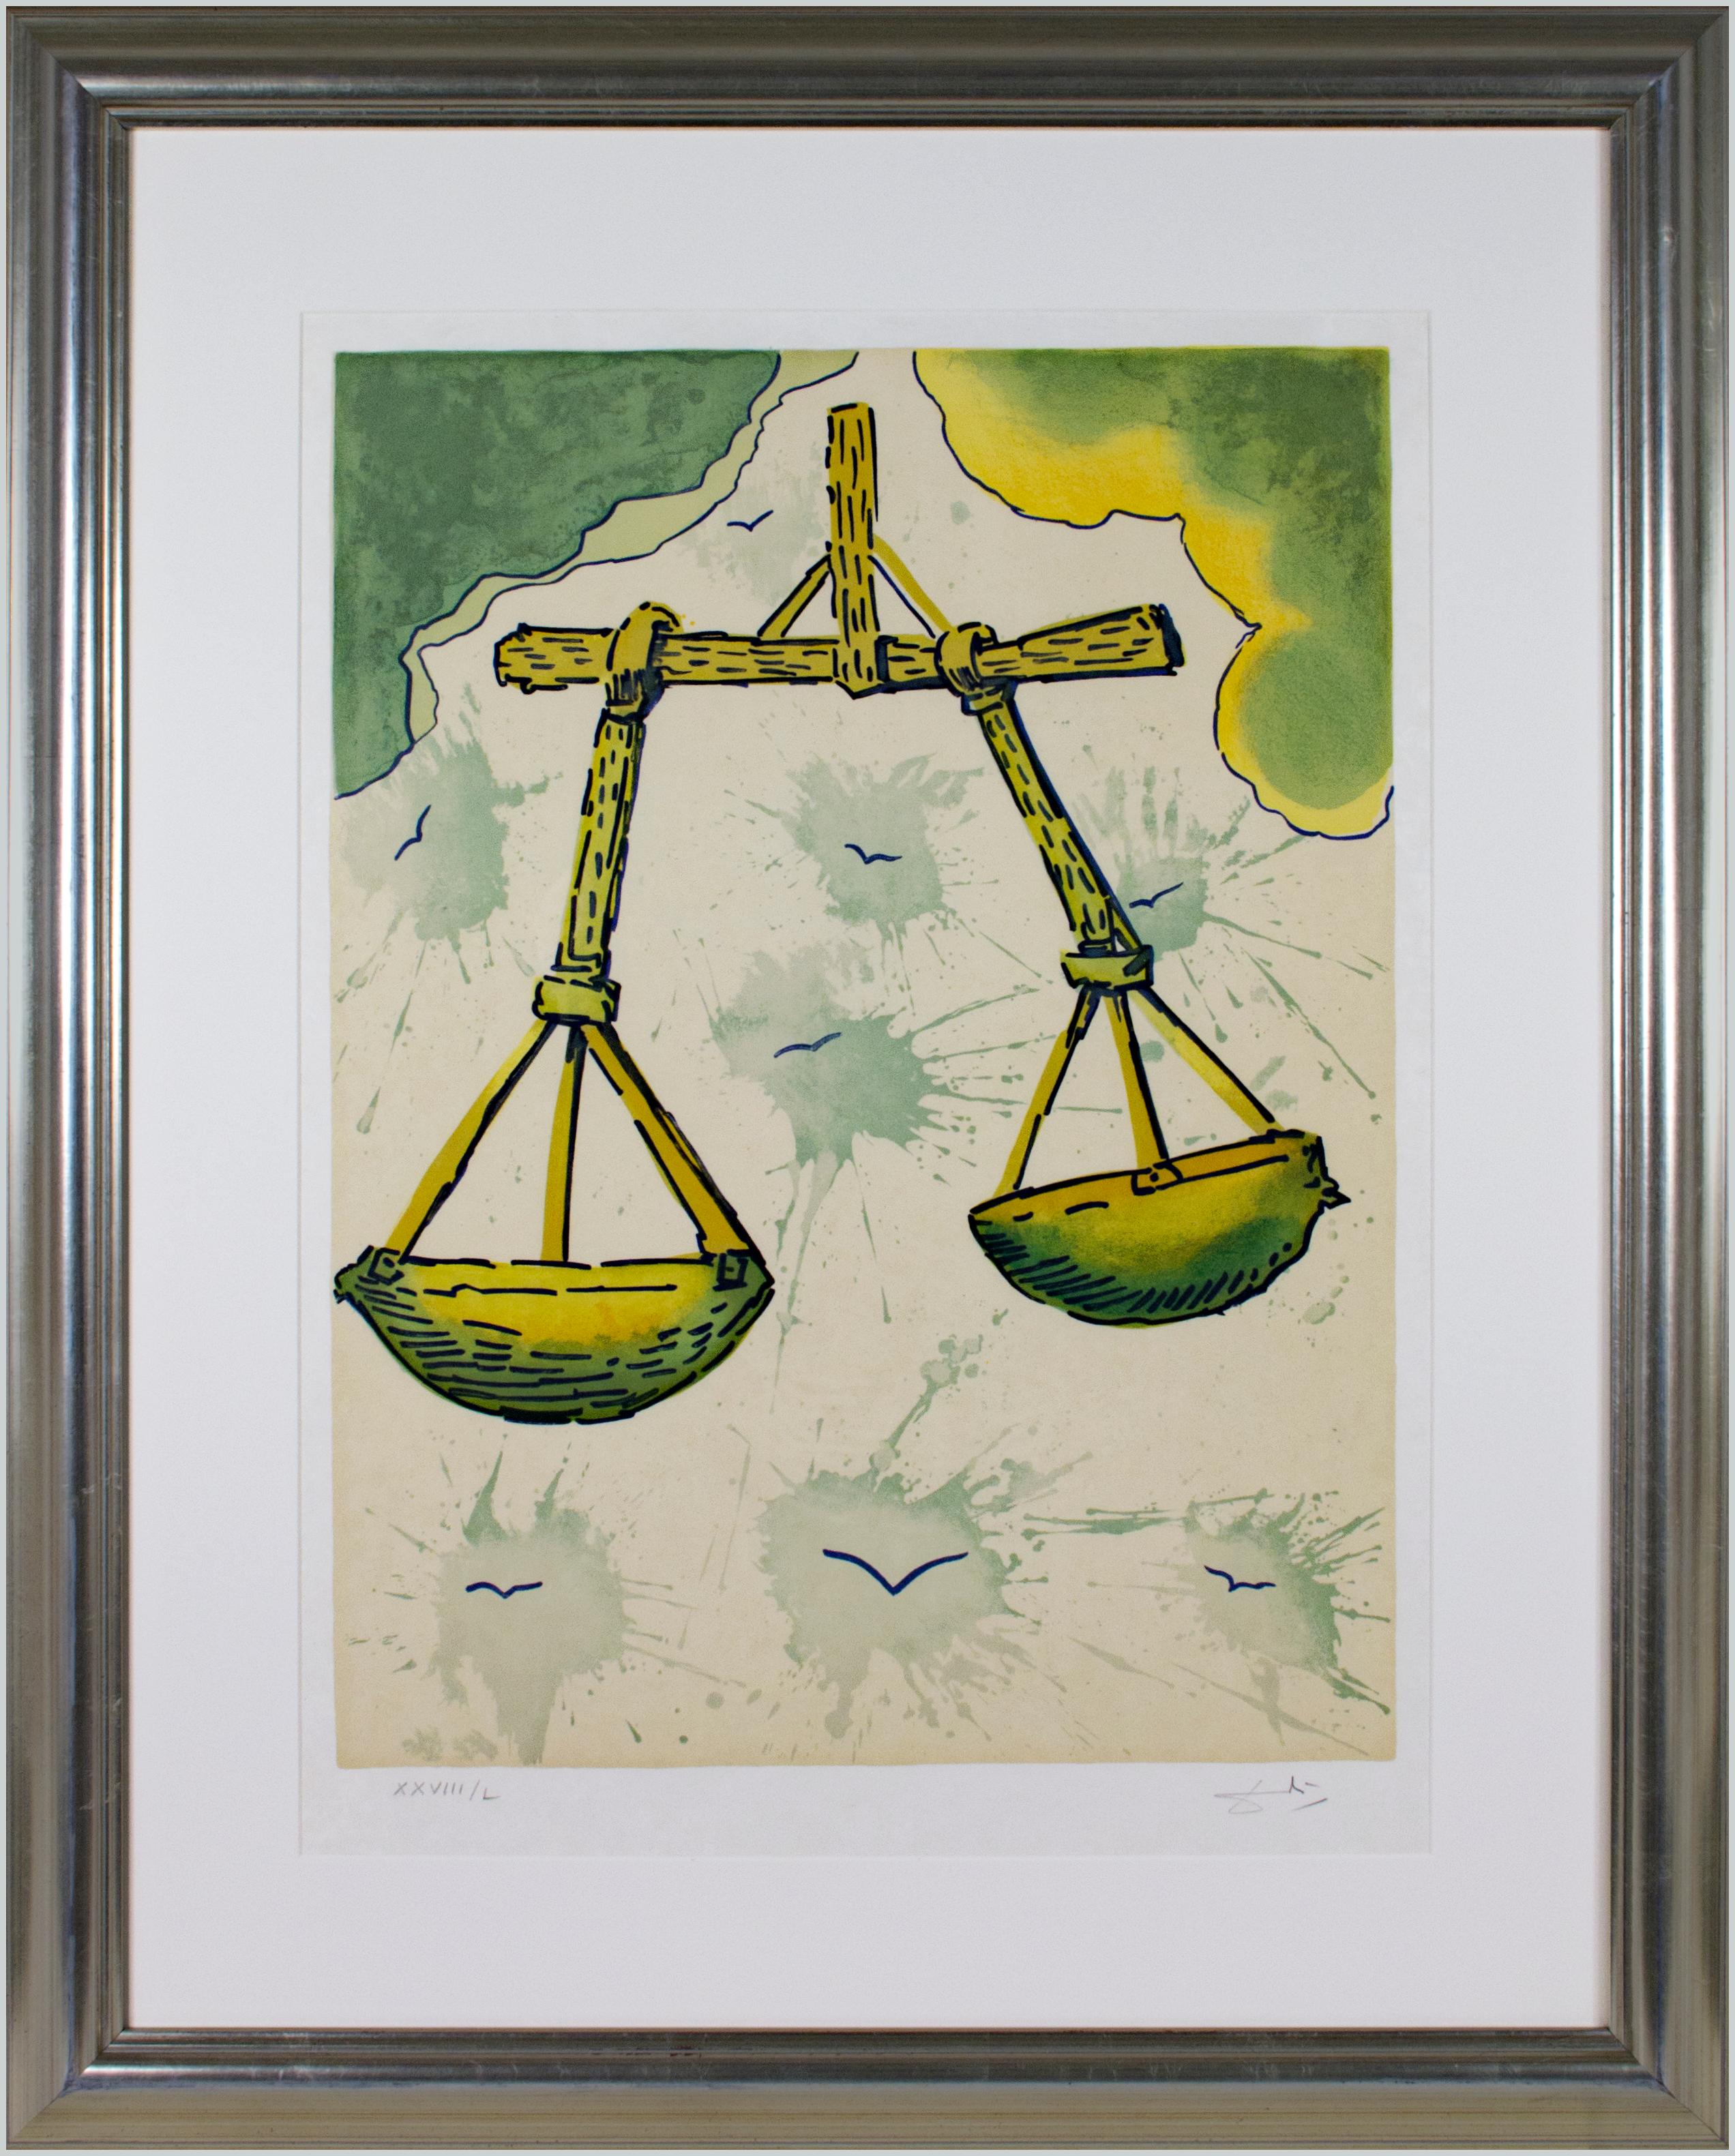 Salvador Dalí Print - "Libra" original color lithograph from Signs of the Zodiac series by Dali 31/50